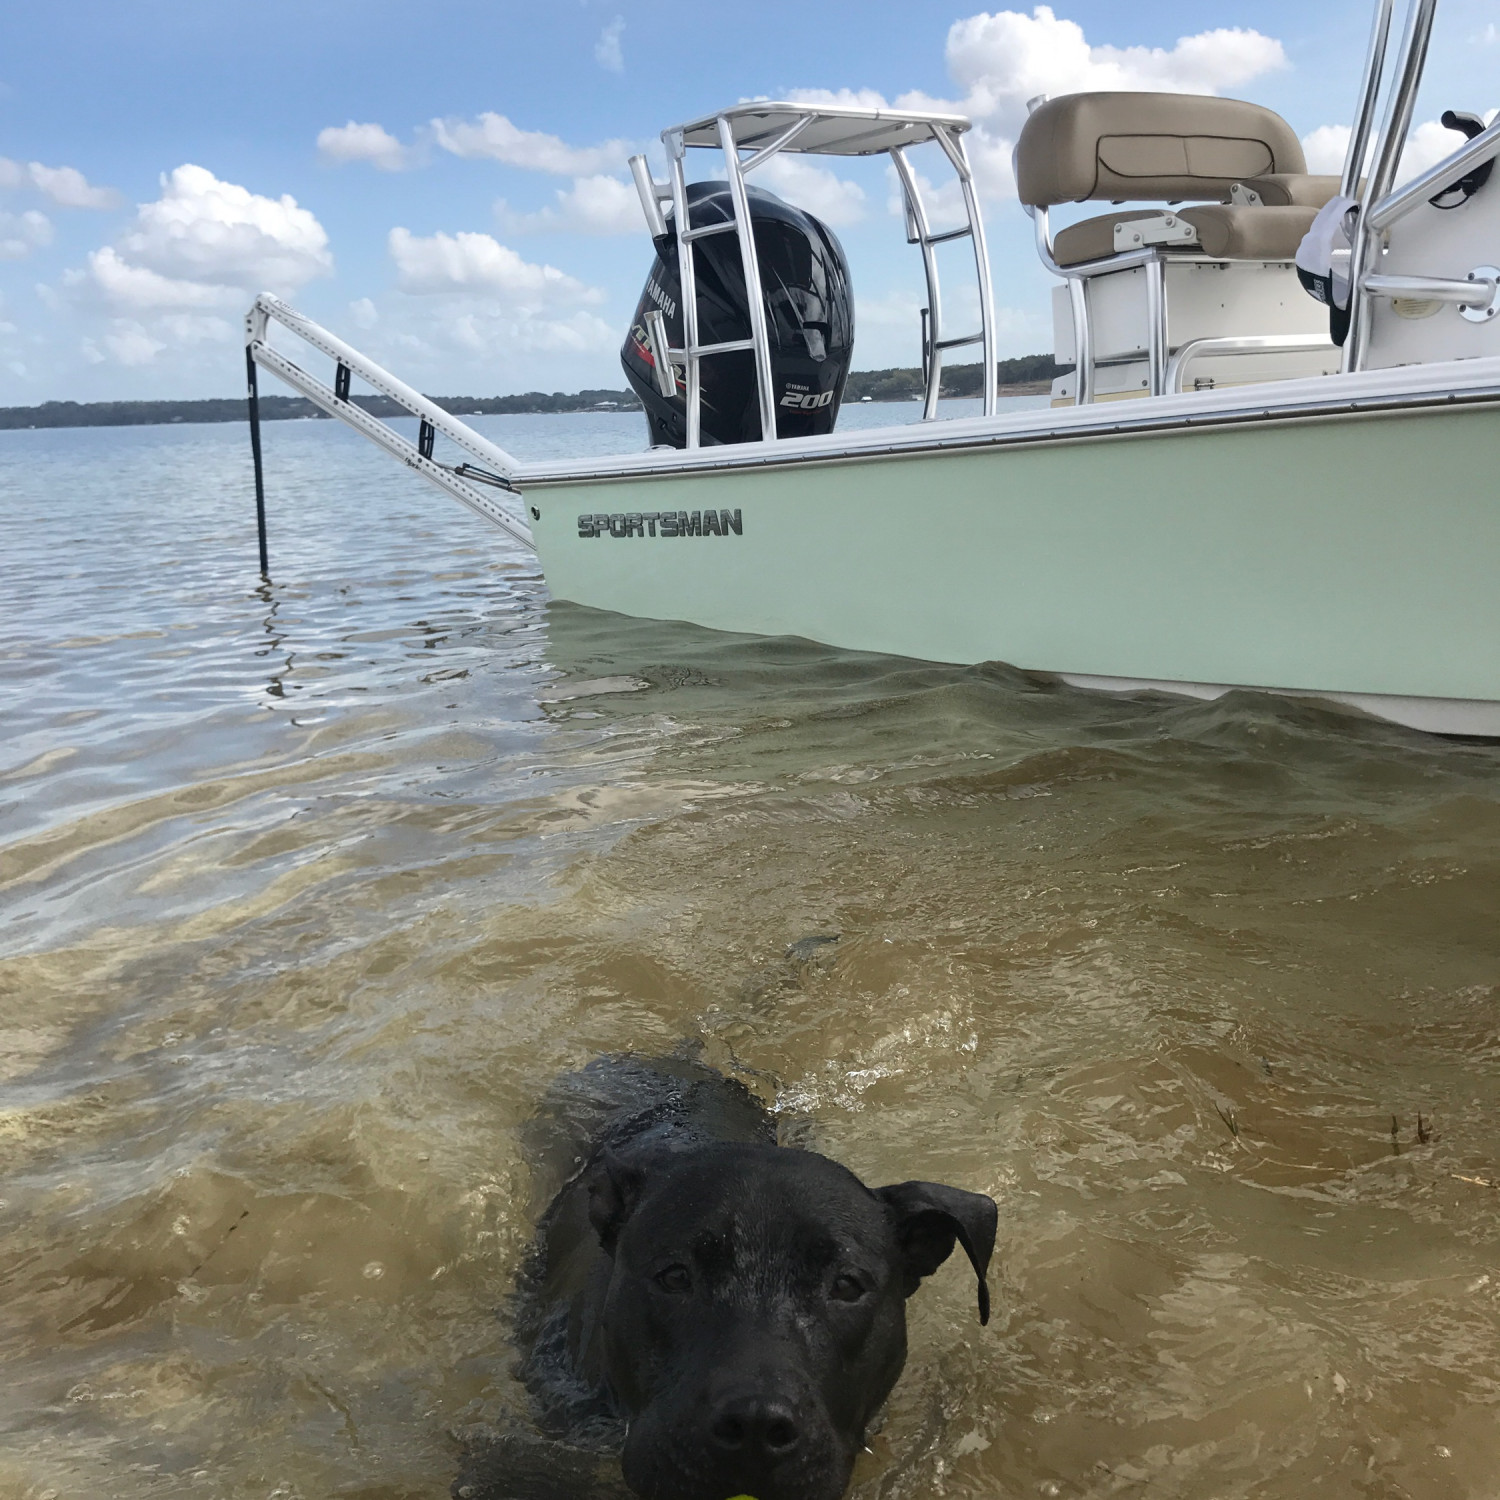 My dog Thor happily enjoying some fetch in-between fishing breaks on my 2015 Sportsman Tournament 214! #SportsmanApril2018 #SportsmanPhotoContest #SportsmanBoats #Tournament214